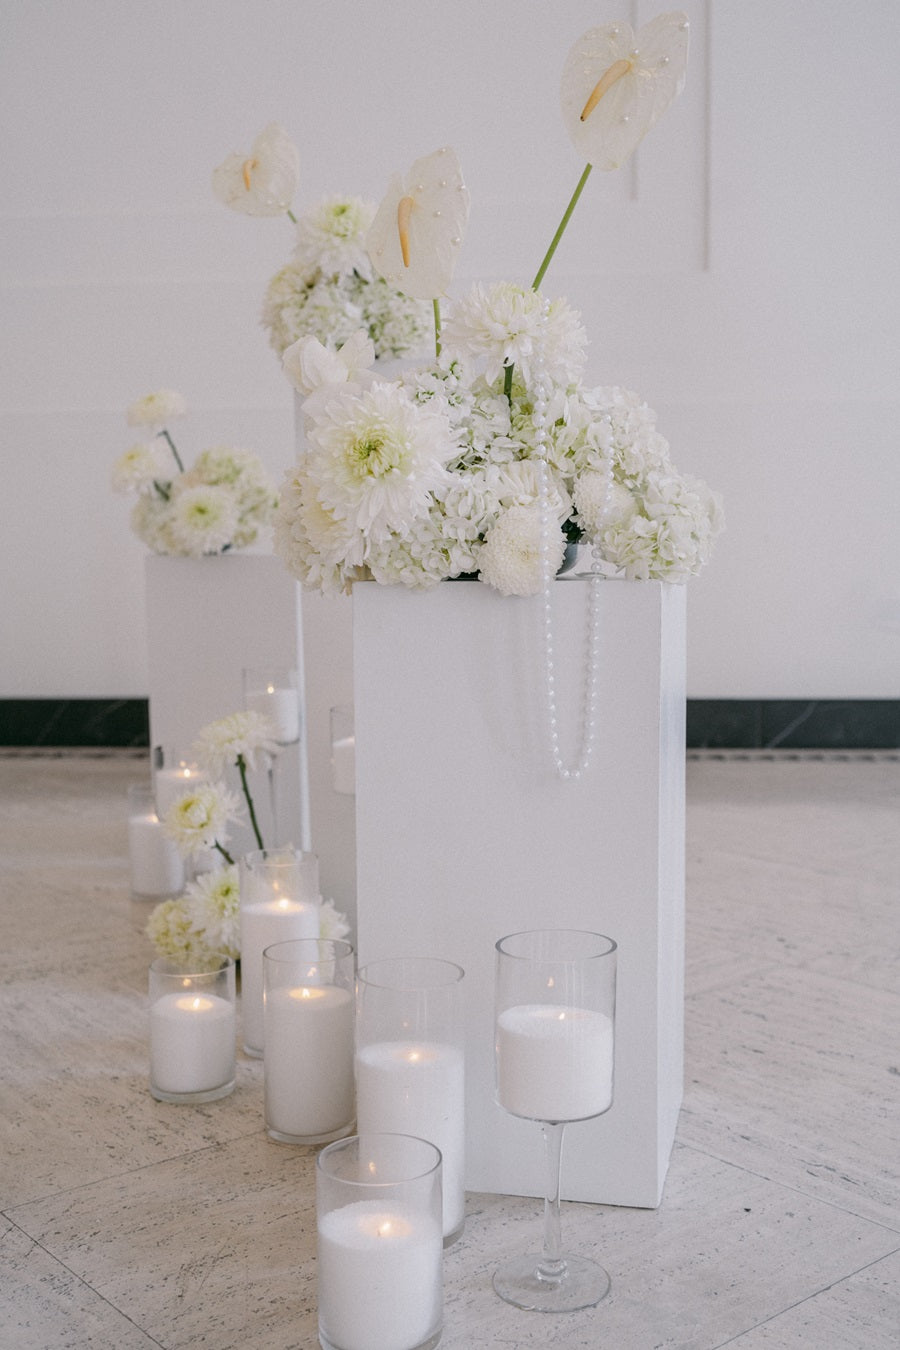 Close up on one of the floral pedestals. The arrangements are full of roses, calathea, and hydrangea. Accented with both hanging strands of pearls and individual pearls placed on the flower petals. Beaded candles line the base of the pedestal.